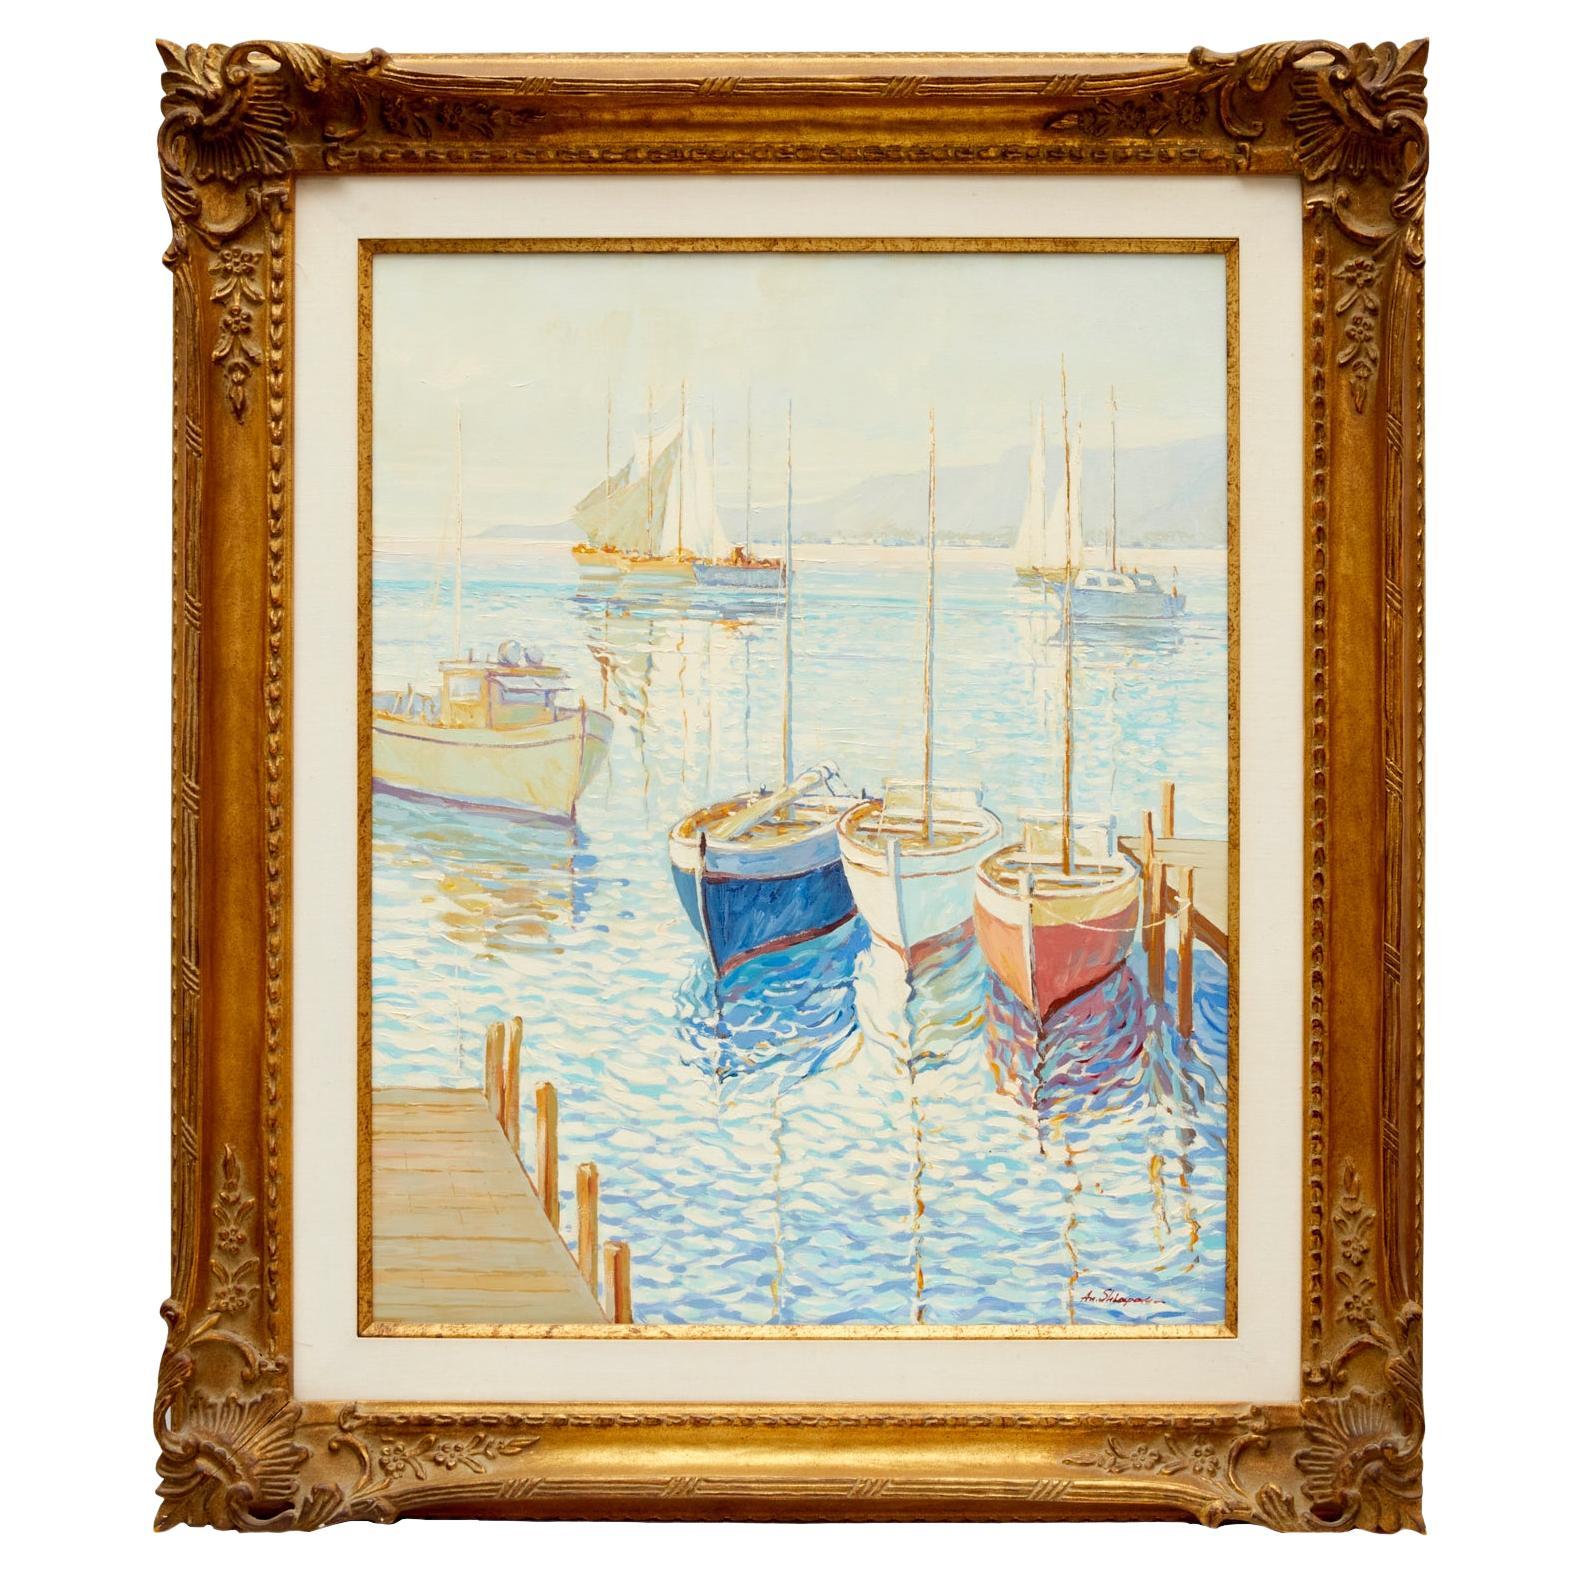 20th C. Docked Sailboats Impressionist Painting, Oil on Canvas, Anatoly Shlapak